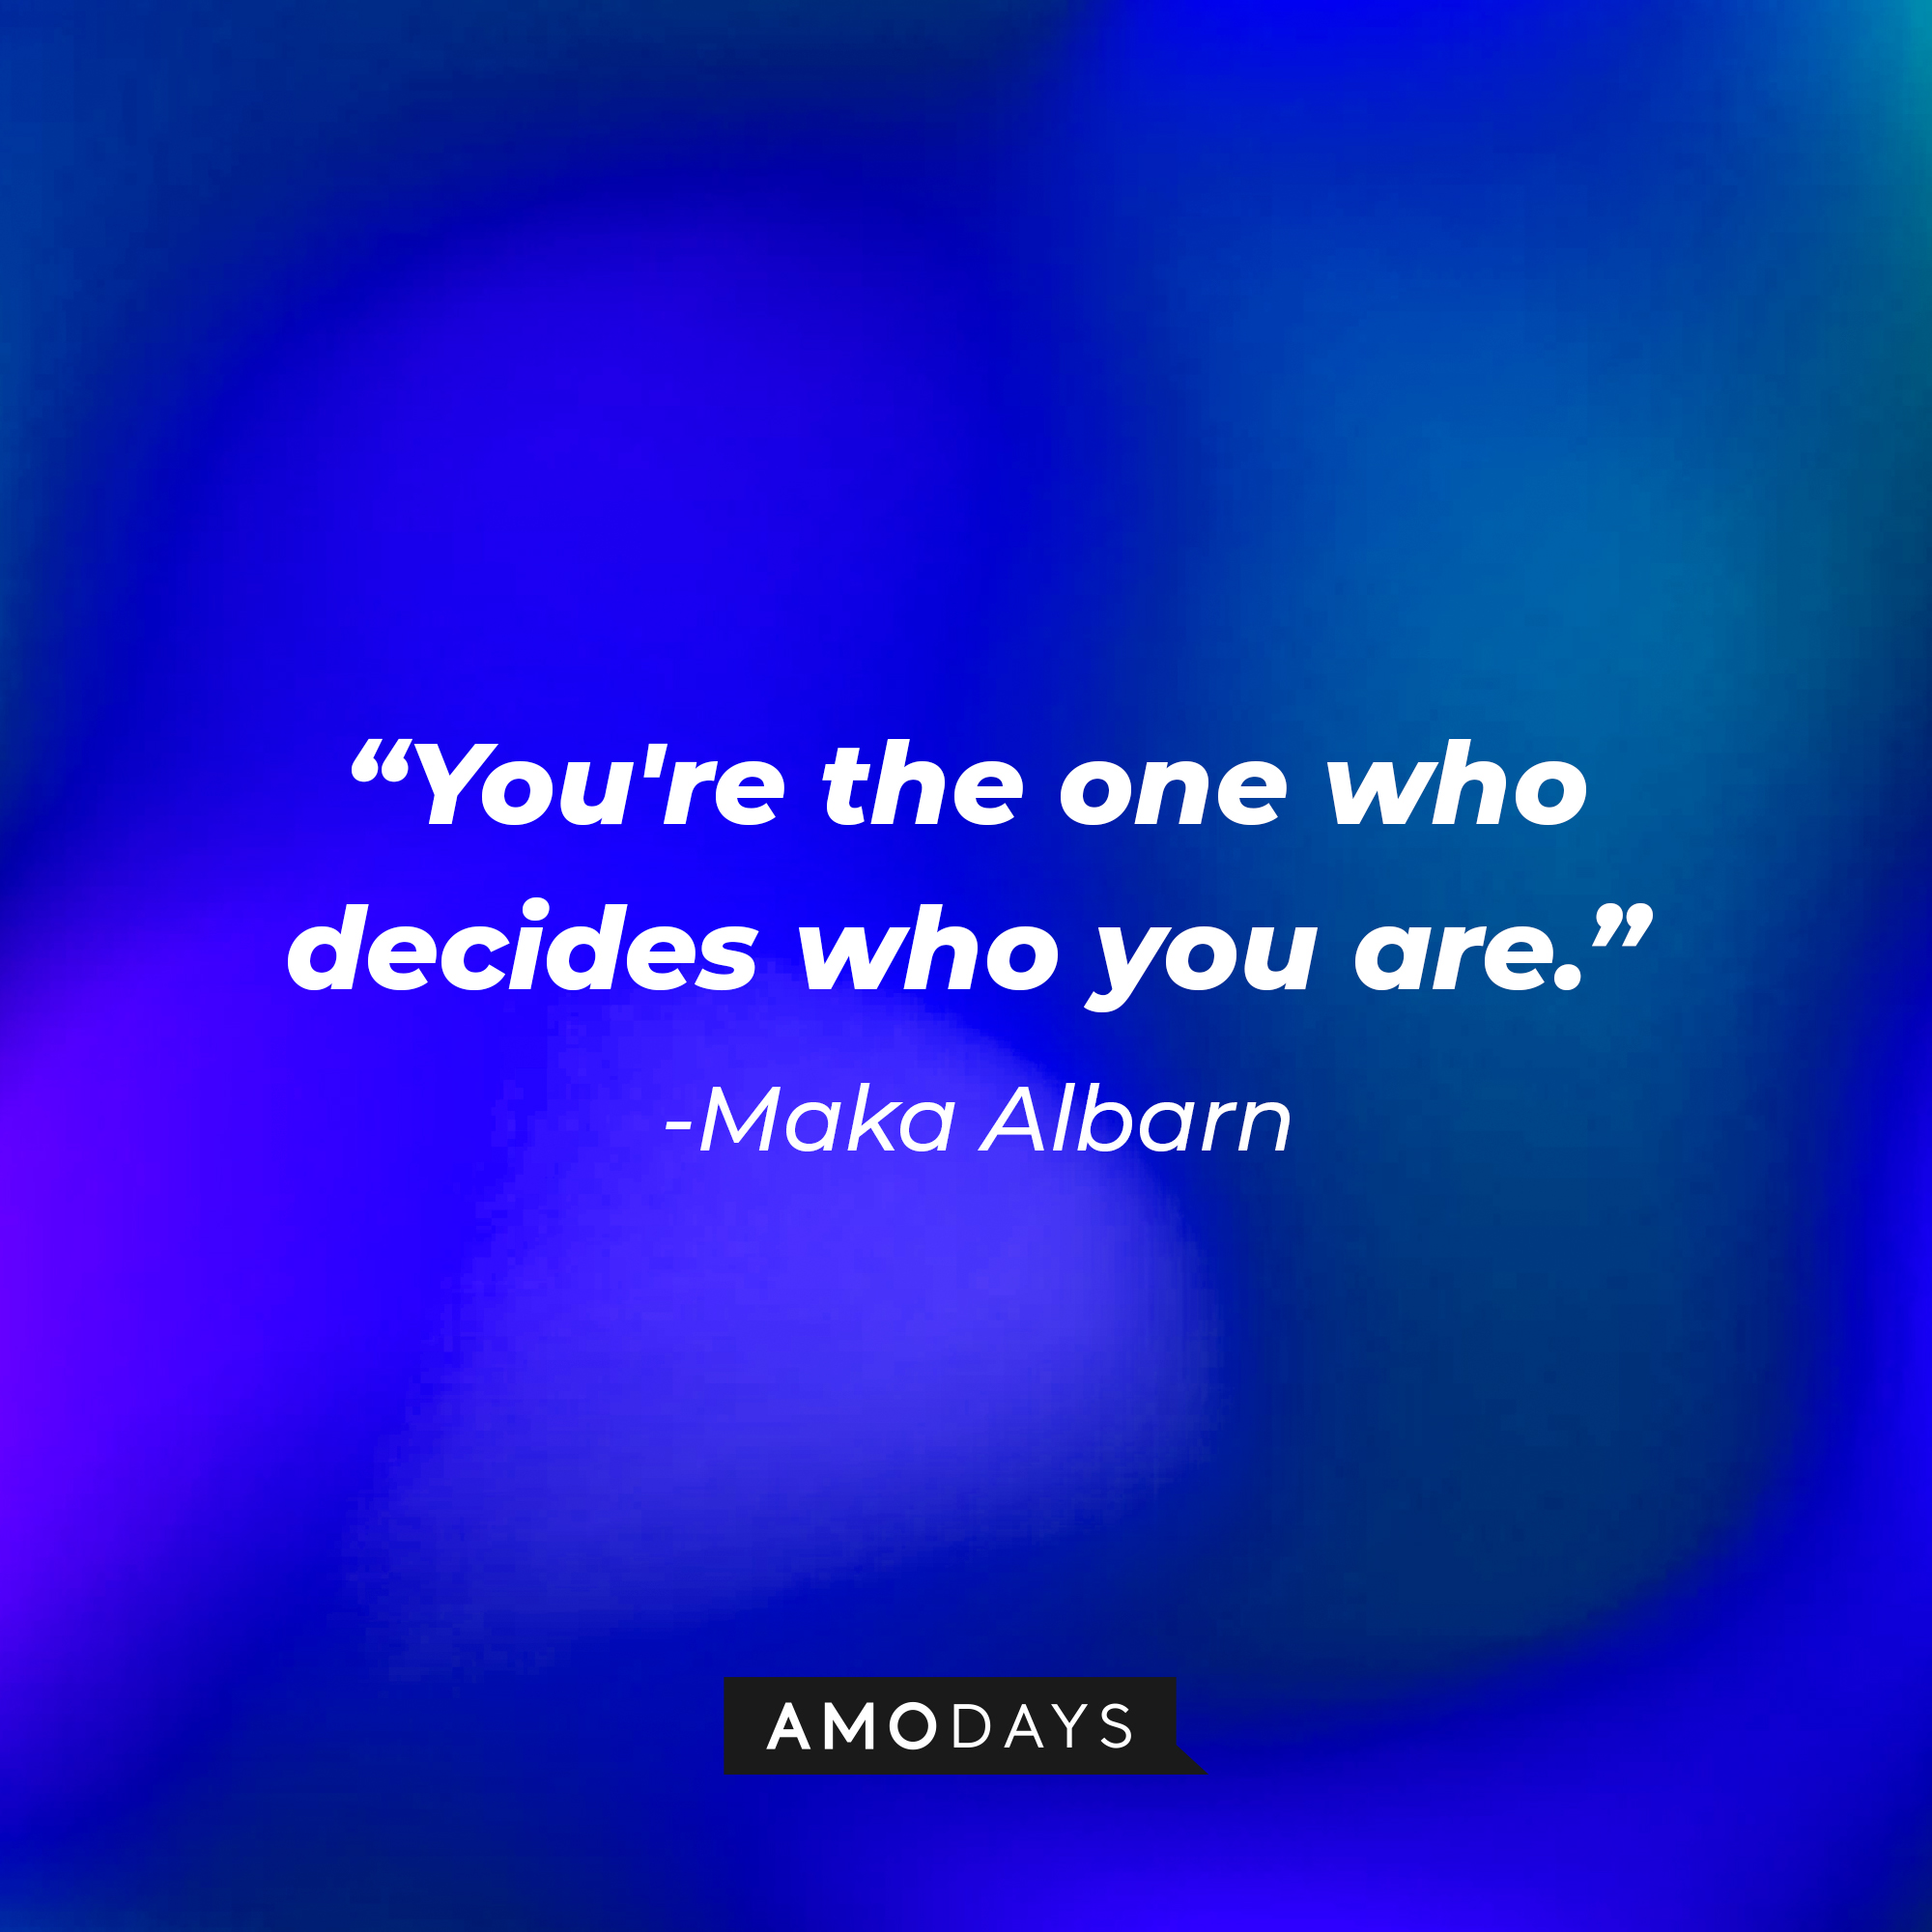 Maka Albarn’s quote: "You're the one who decides who you are." | Image: AmoDays